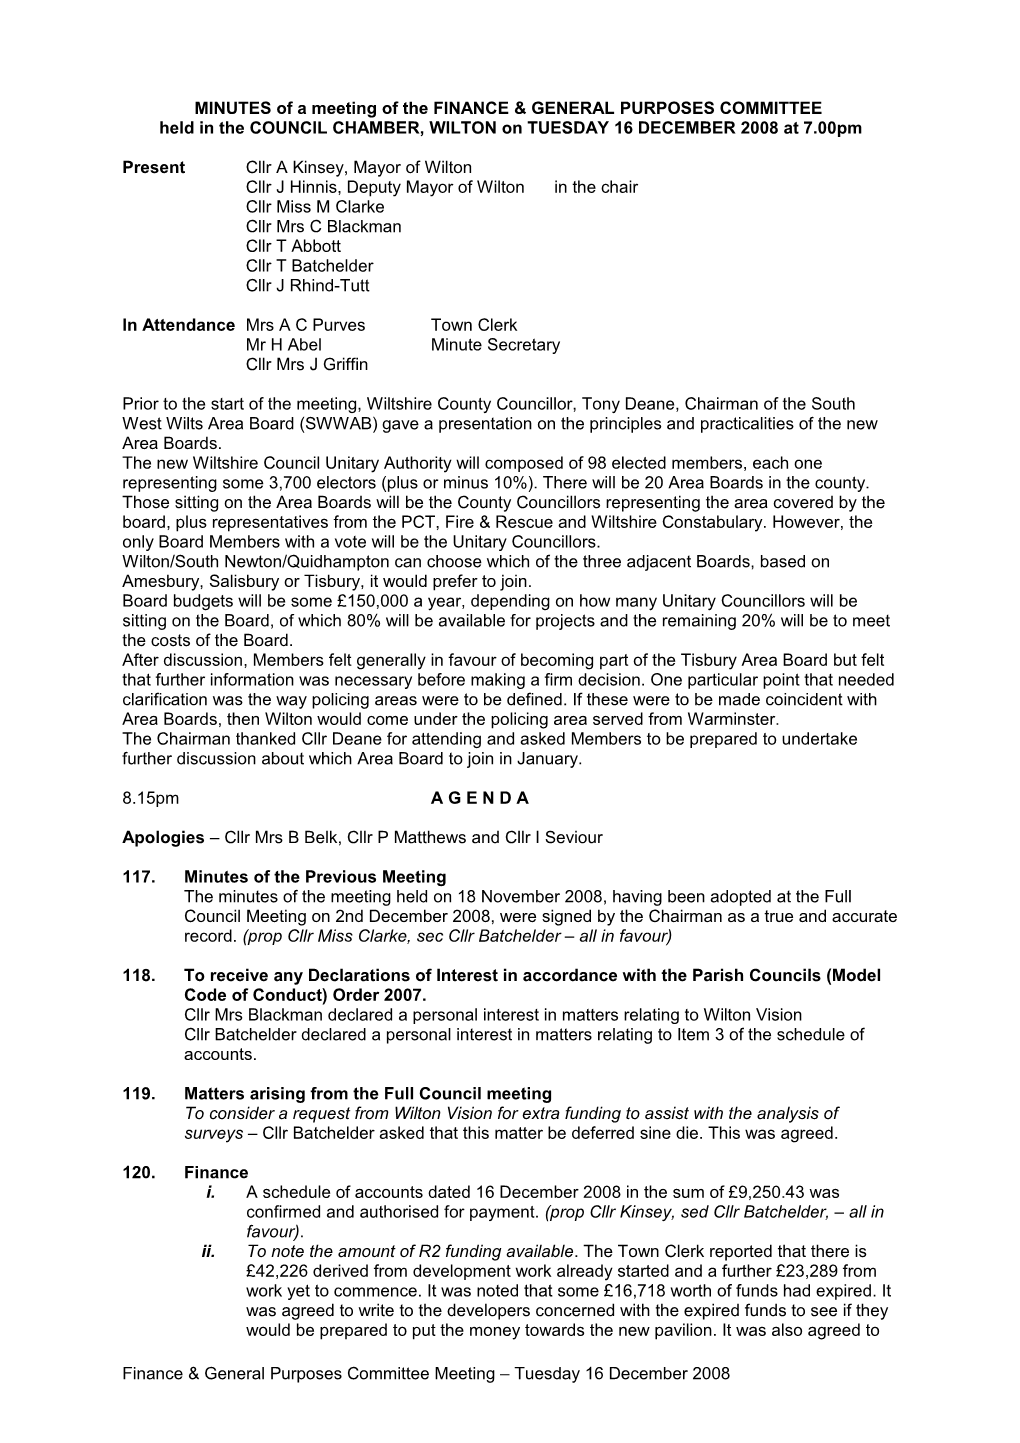 MINUTES of a Meeting of WILTON TOWN COUNCIL Held in the COUNCIL CHAMBERS, KINGSBURY SQUARE s1